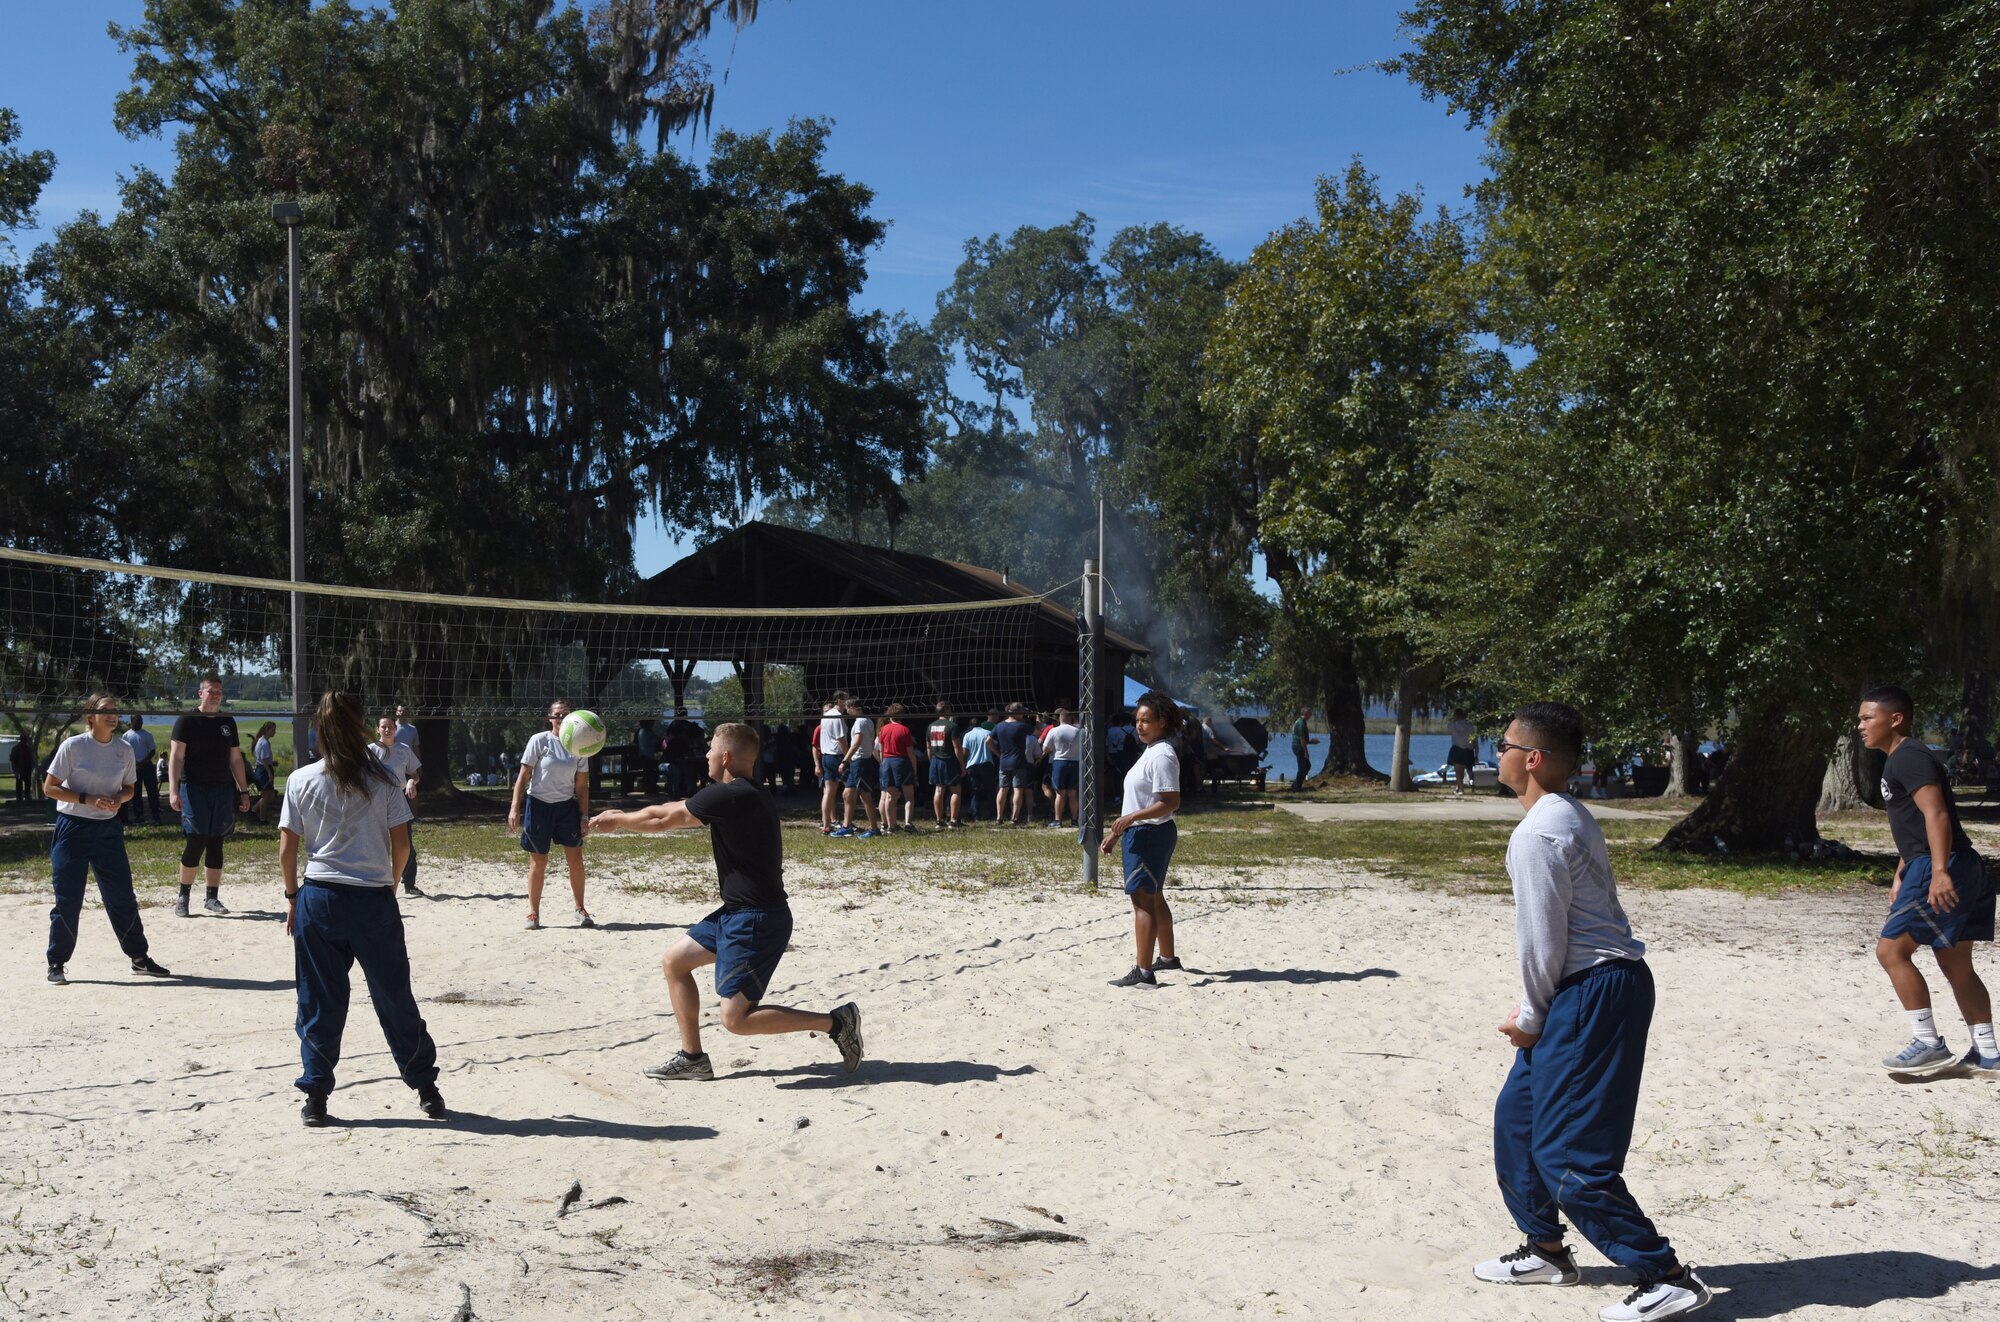 Keesler Airmen participate in a game of volleyball during Wingman Day at the Marina on Keesler Air Force Base, Mississippi, Oct. 18, 2018. Wingman Day focused on the physical domain, resiliency and team-building initiatives across the base followed by a barbeque and games. (U.S. Air Force photo by Kemberly Groue)